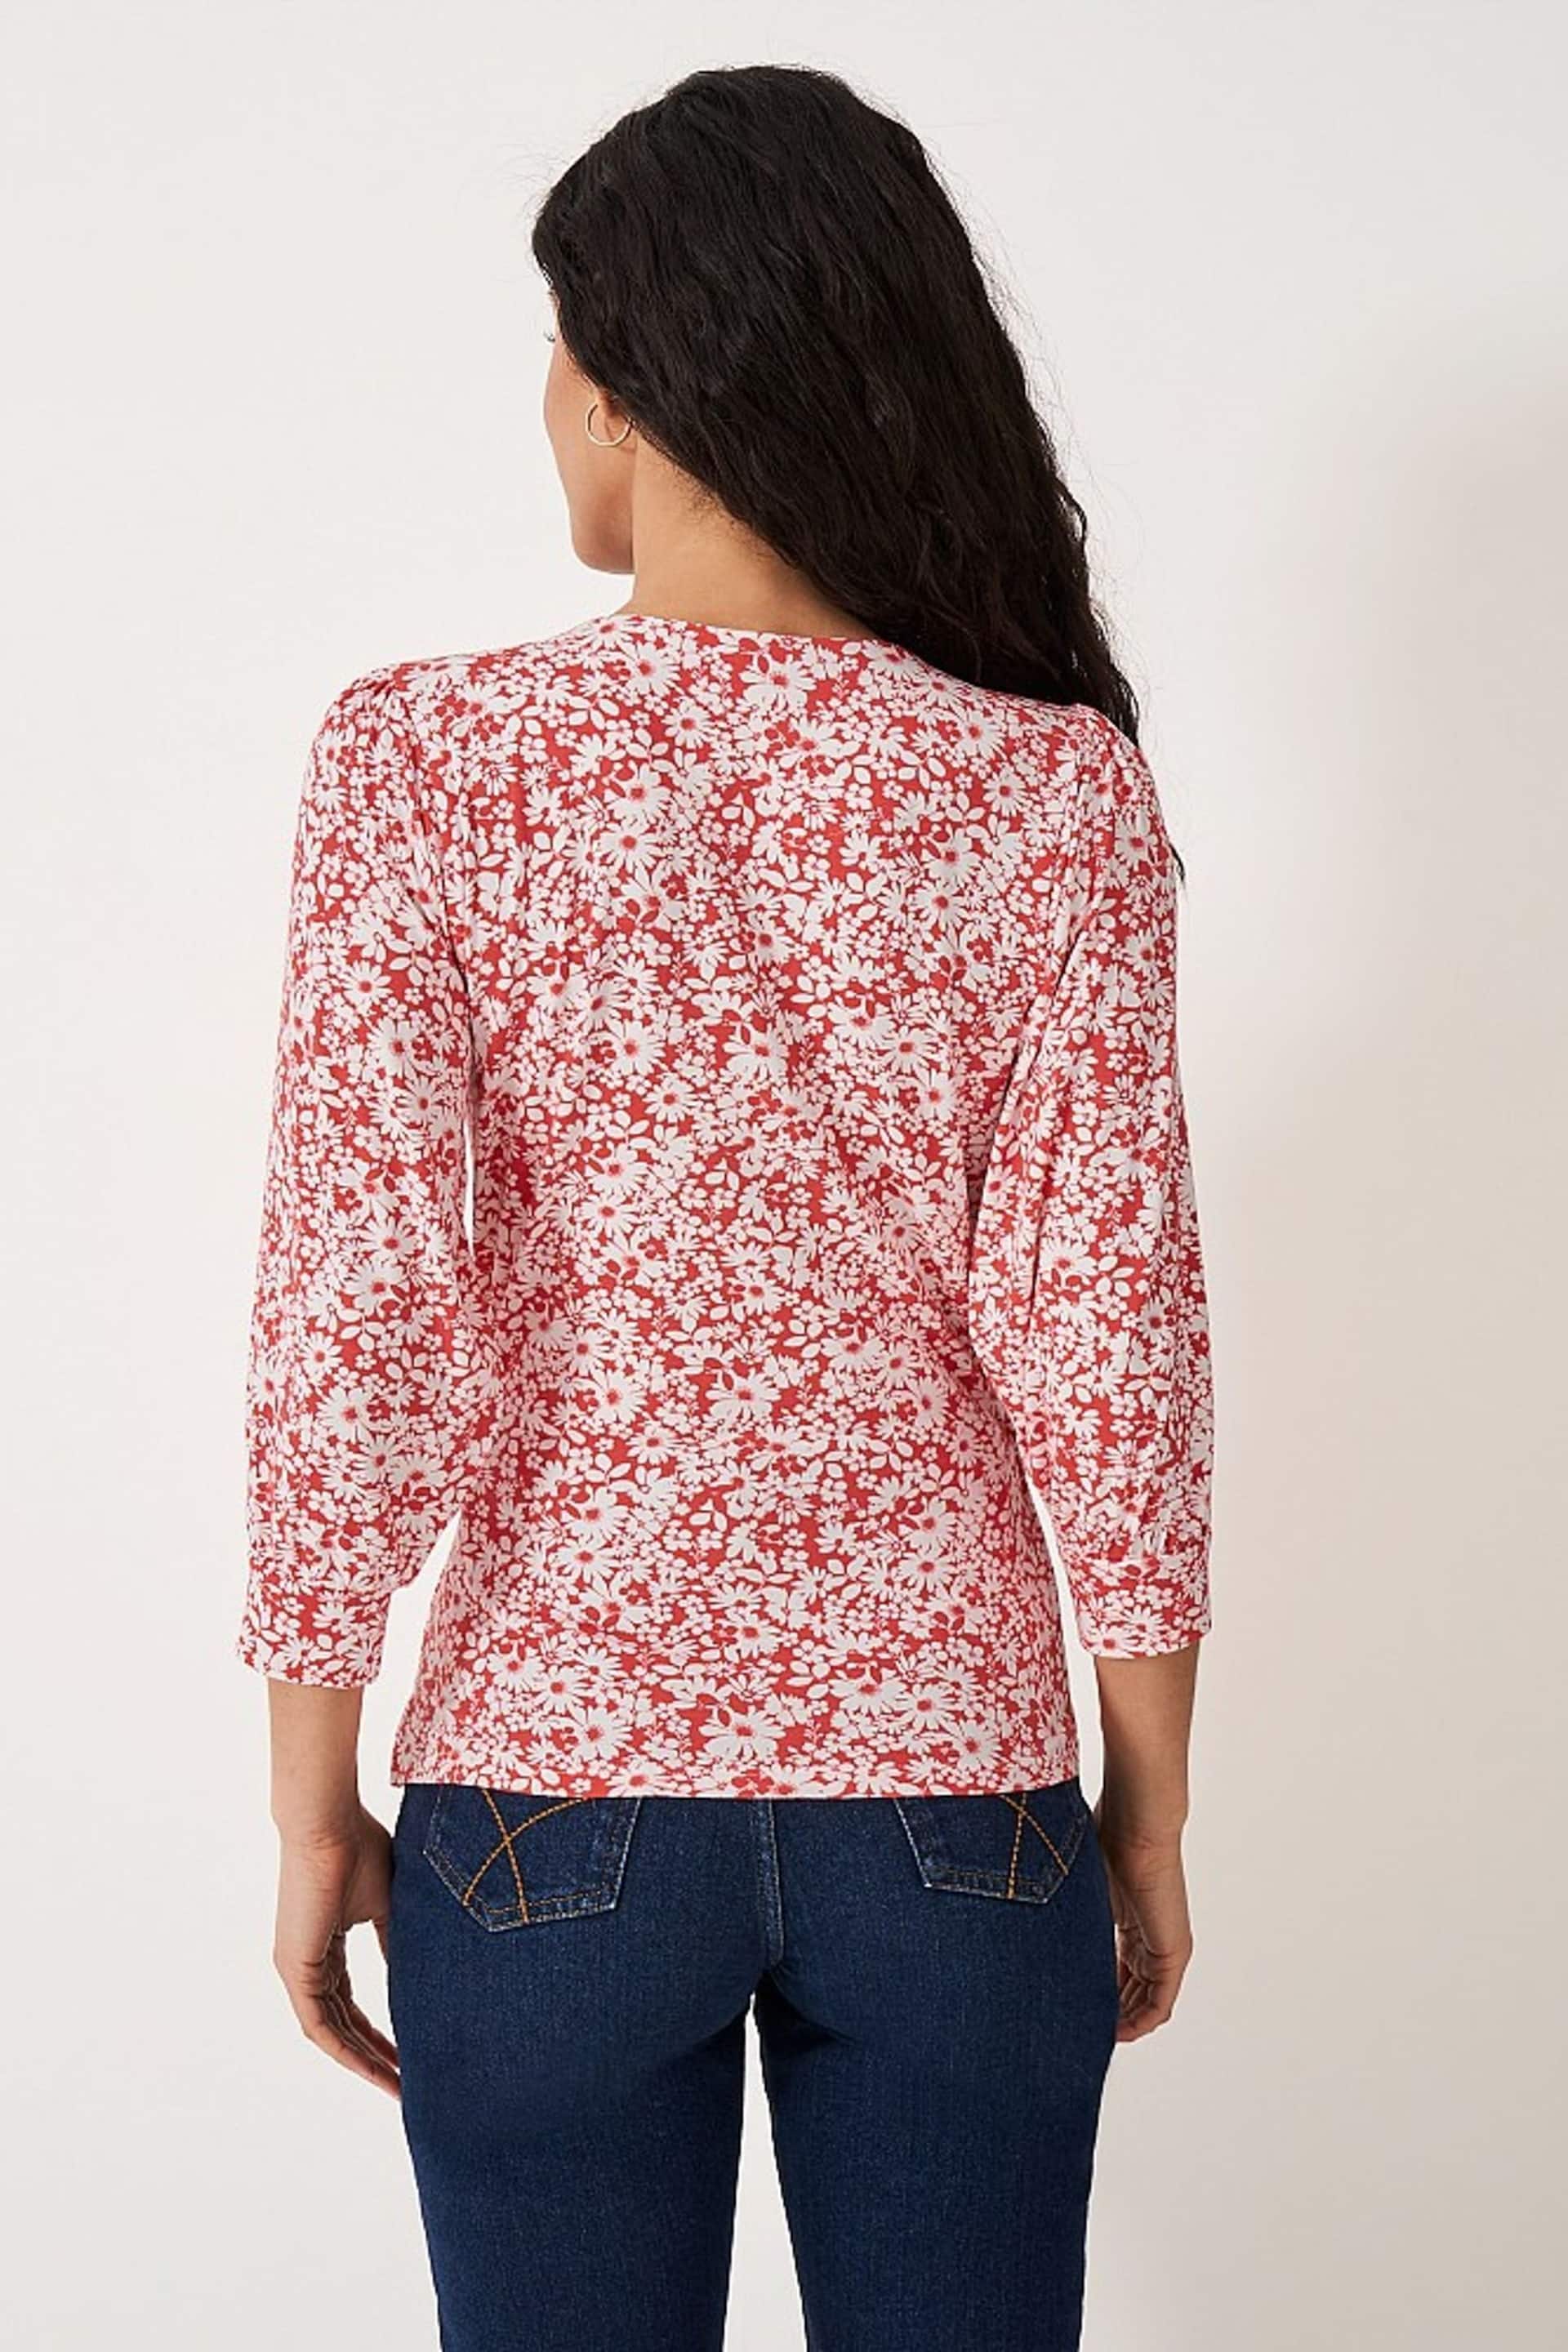 Crew Clothing Company Red Plain Viscose Casual Blouse - Image 3 of 4